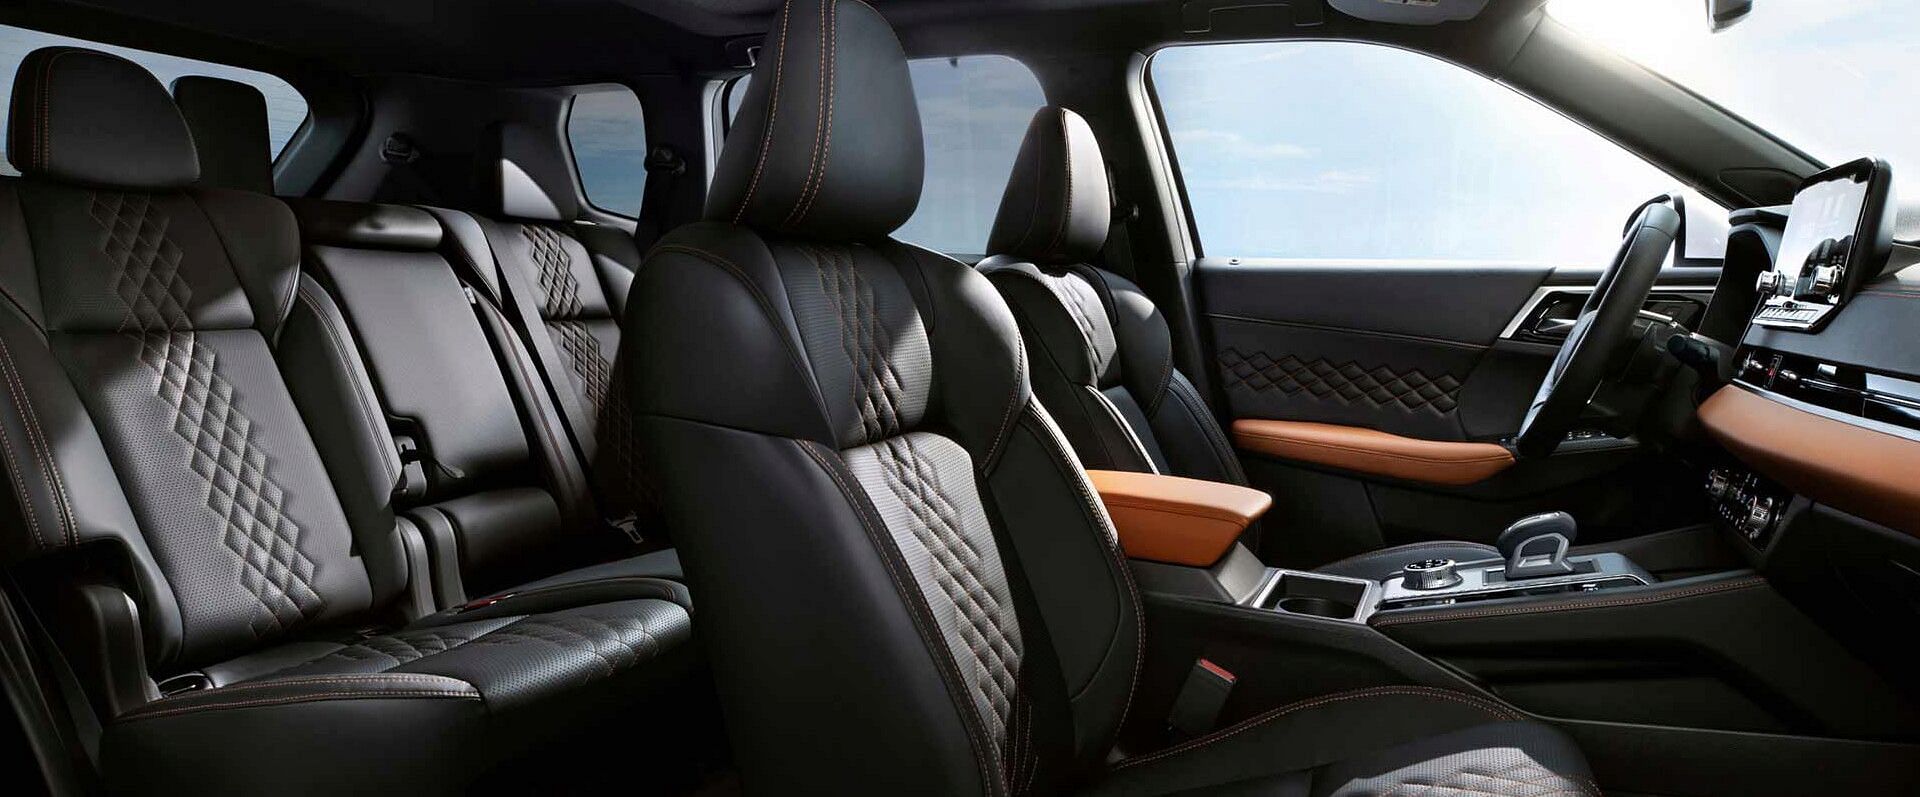 Black interior in the 2023 Mitsubishi Outlander Plug-in Hybrid SUV with third row seating